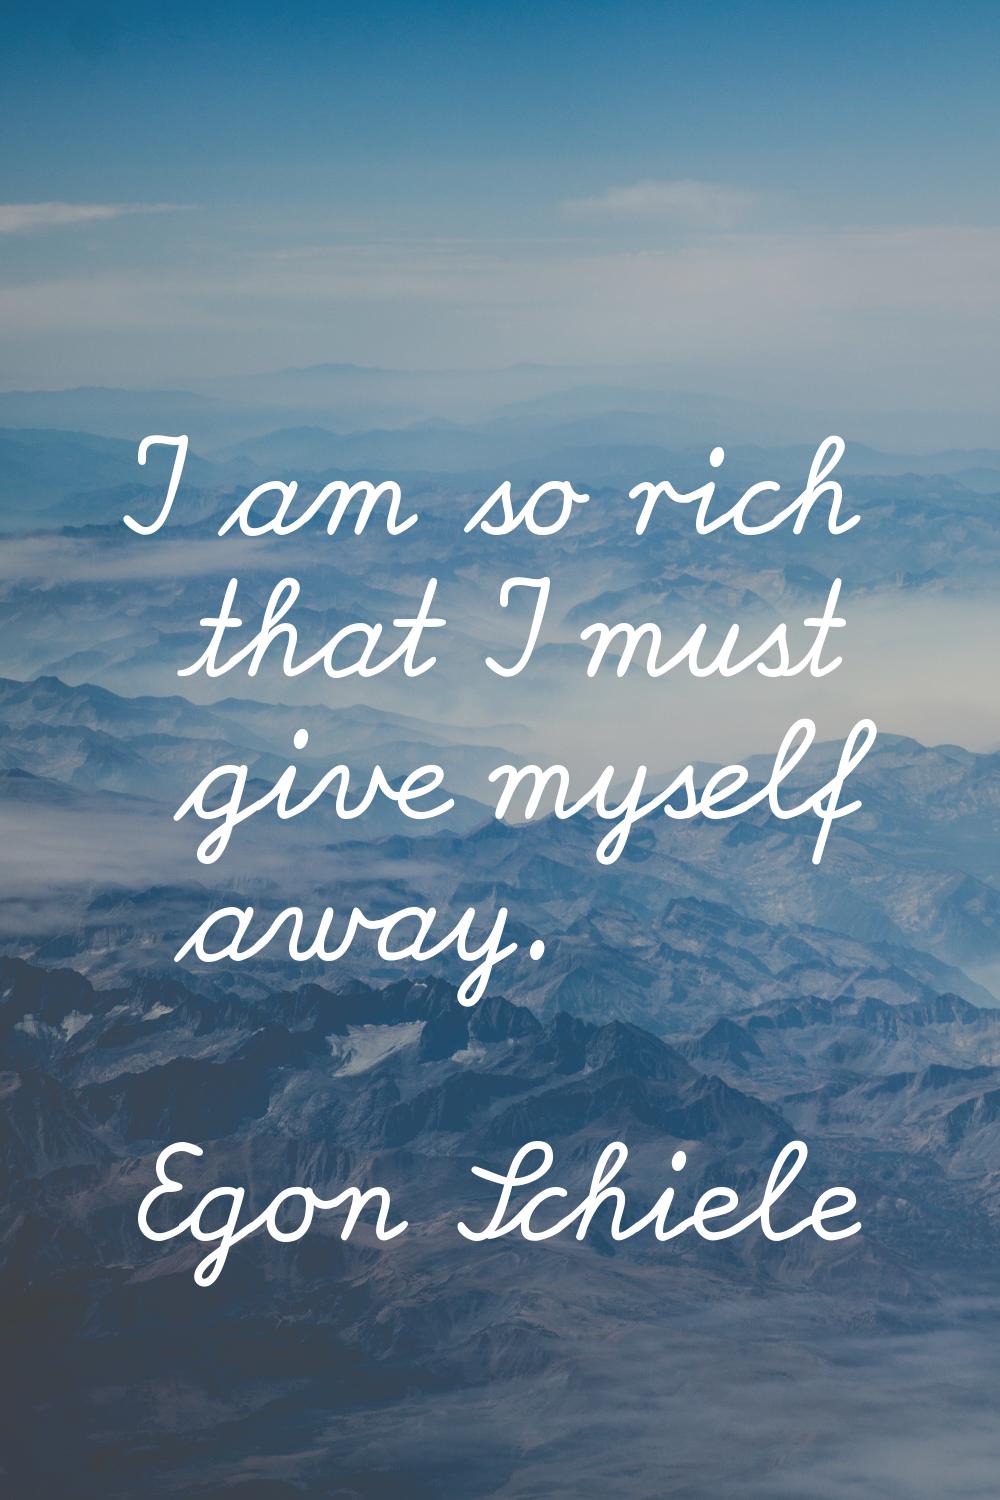 I am so rich that I must give myself away.